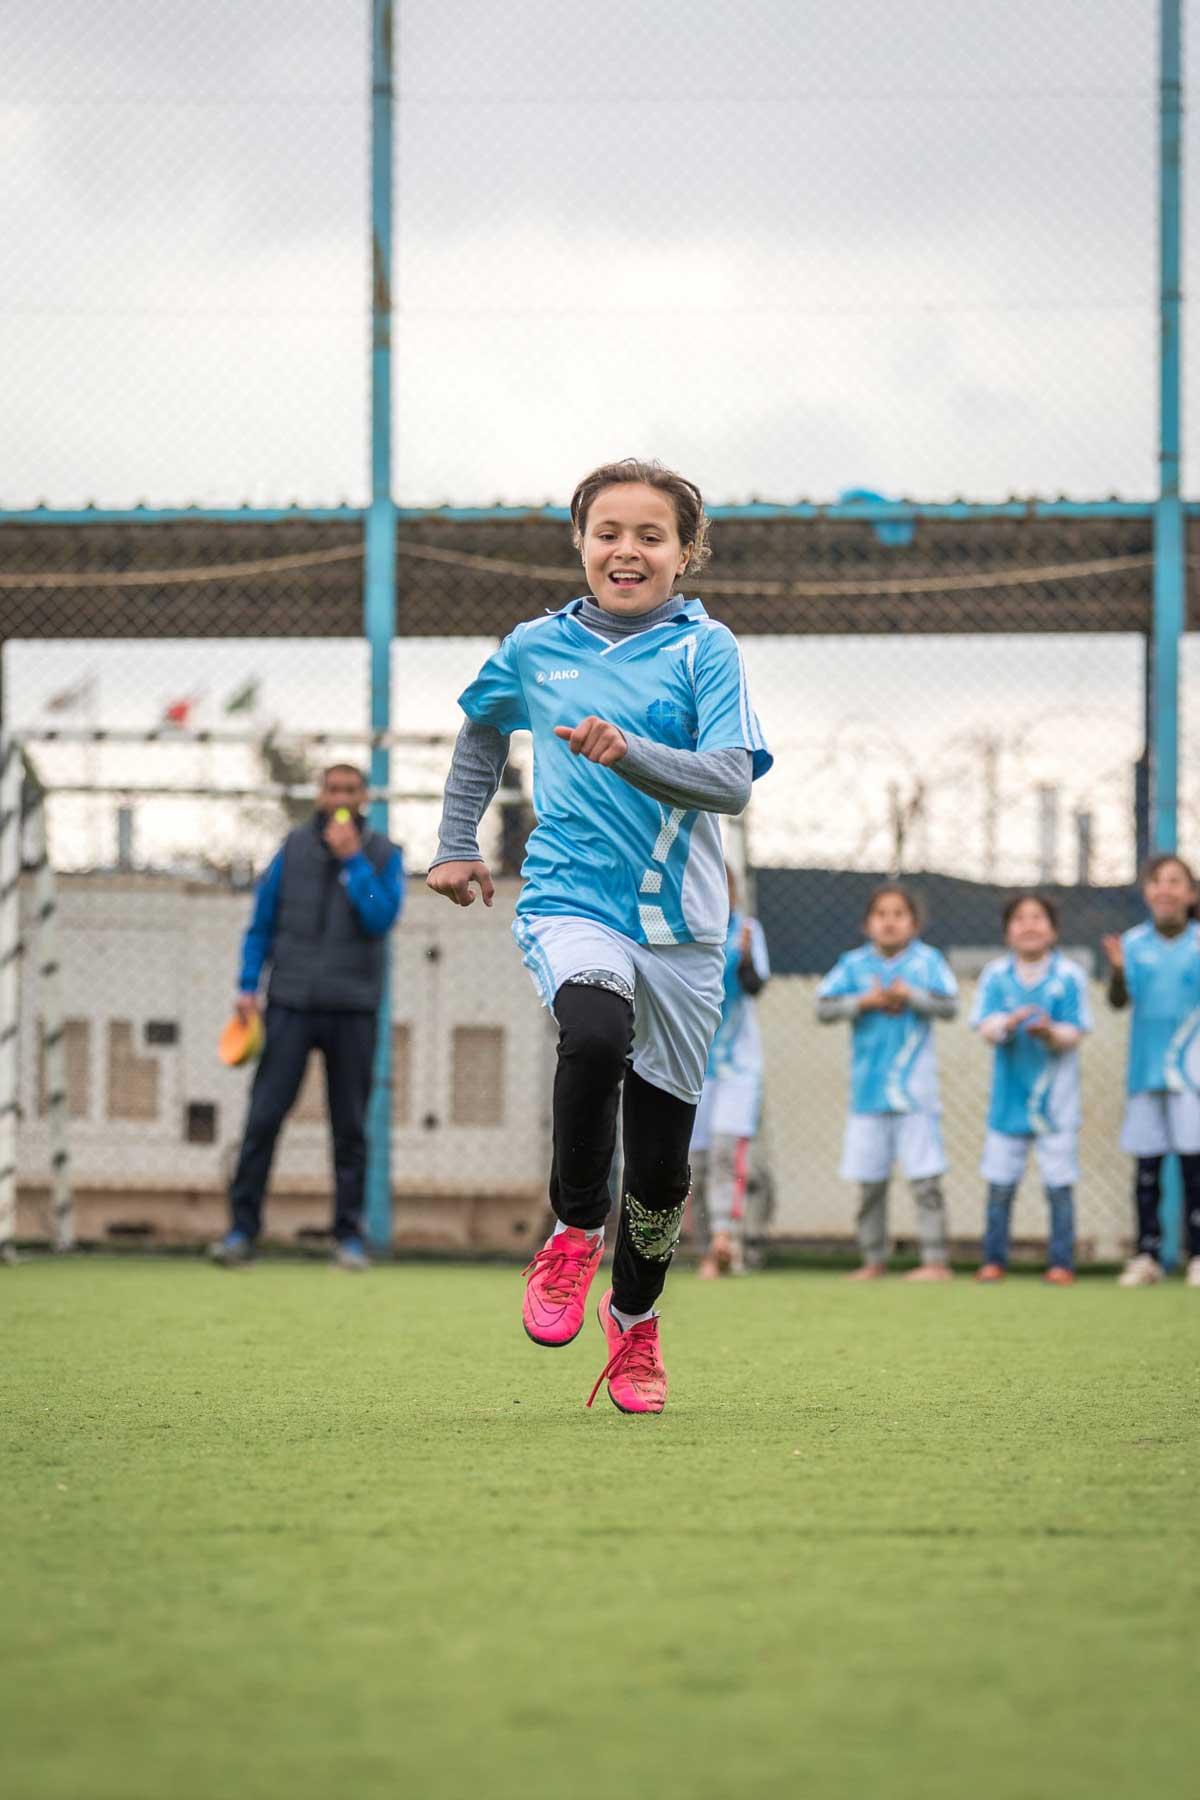 The girls' soccer team is one of the most popular activities at the LWF Peace Oasis in Zaatari. LWF installed visual protection so the girls could play as well. Photo: LWF/ Albin Hillert